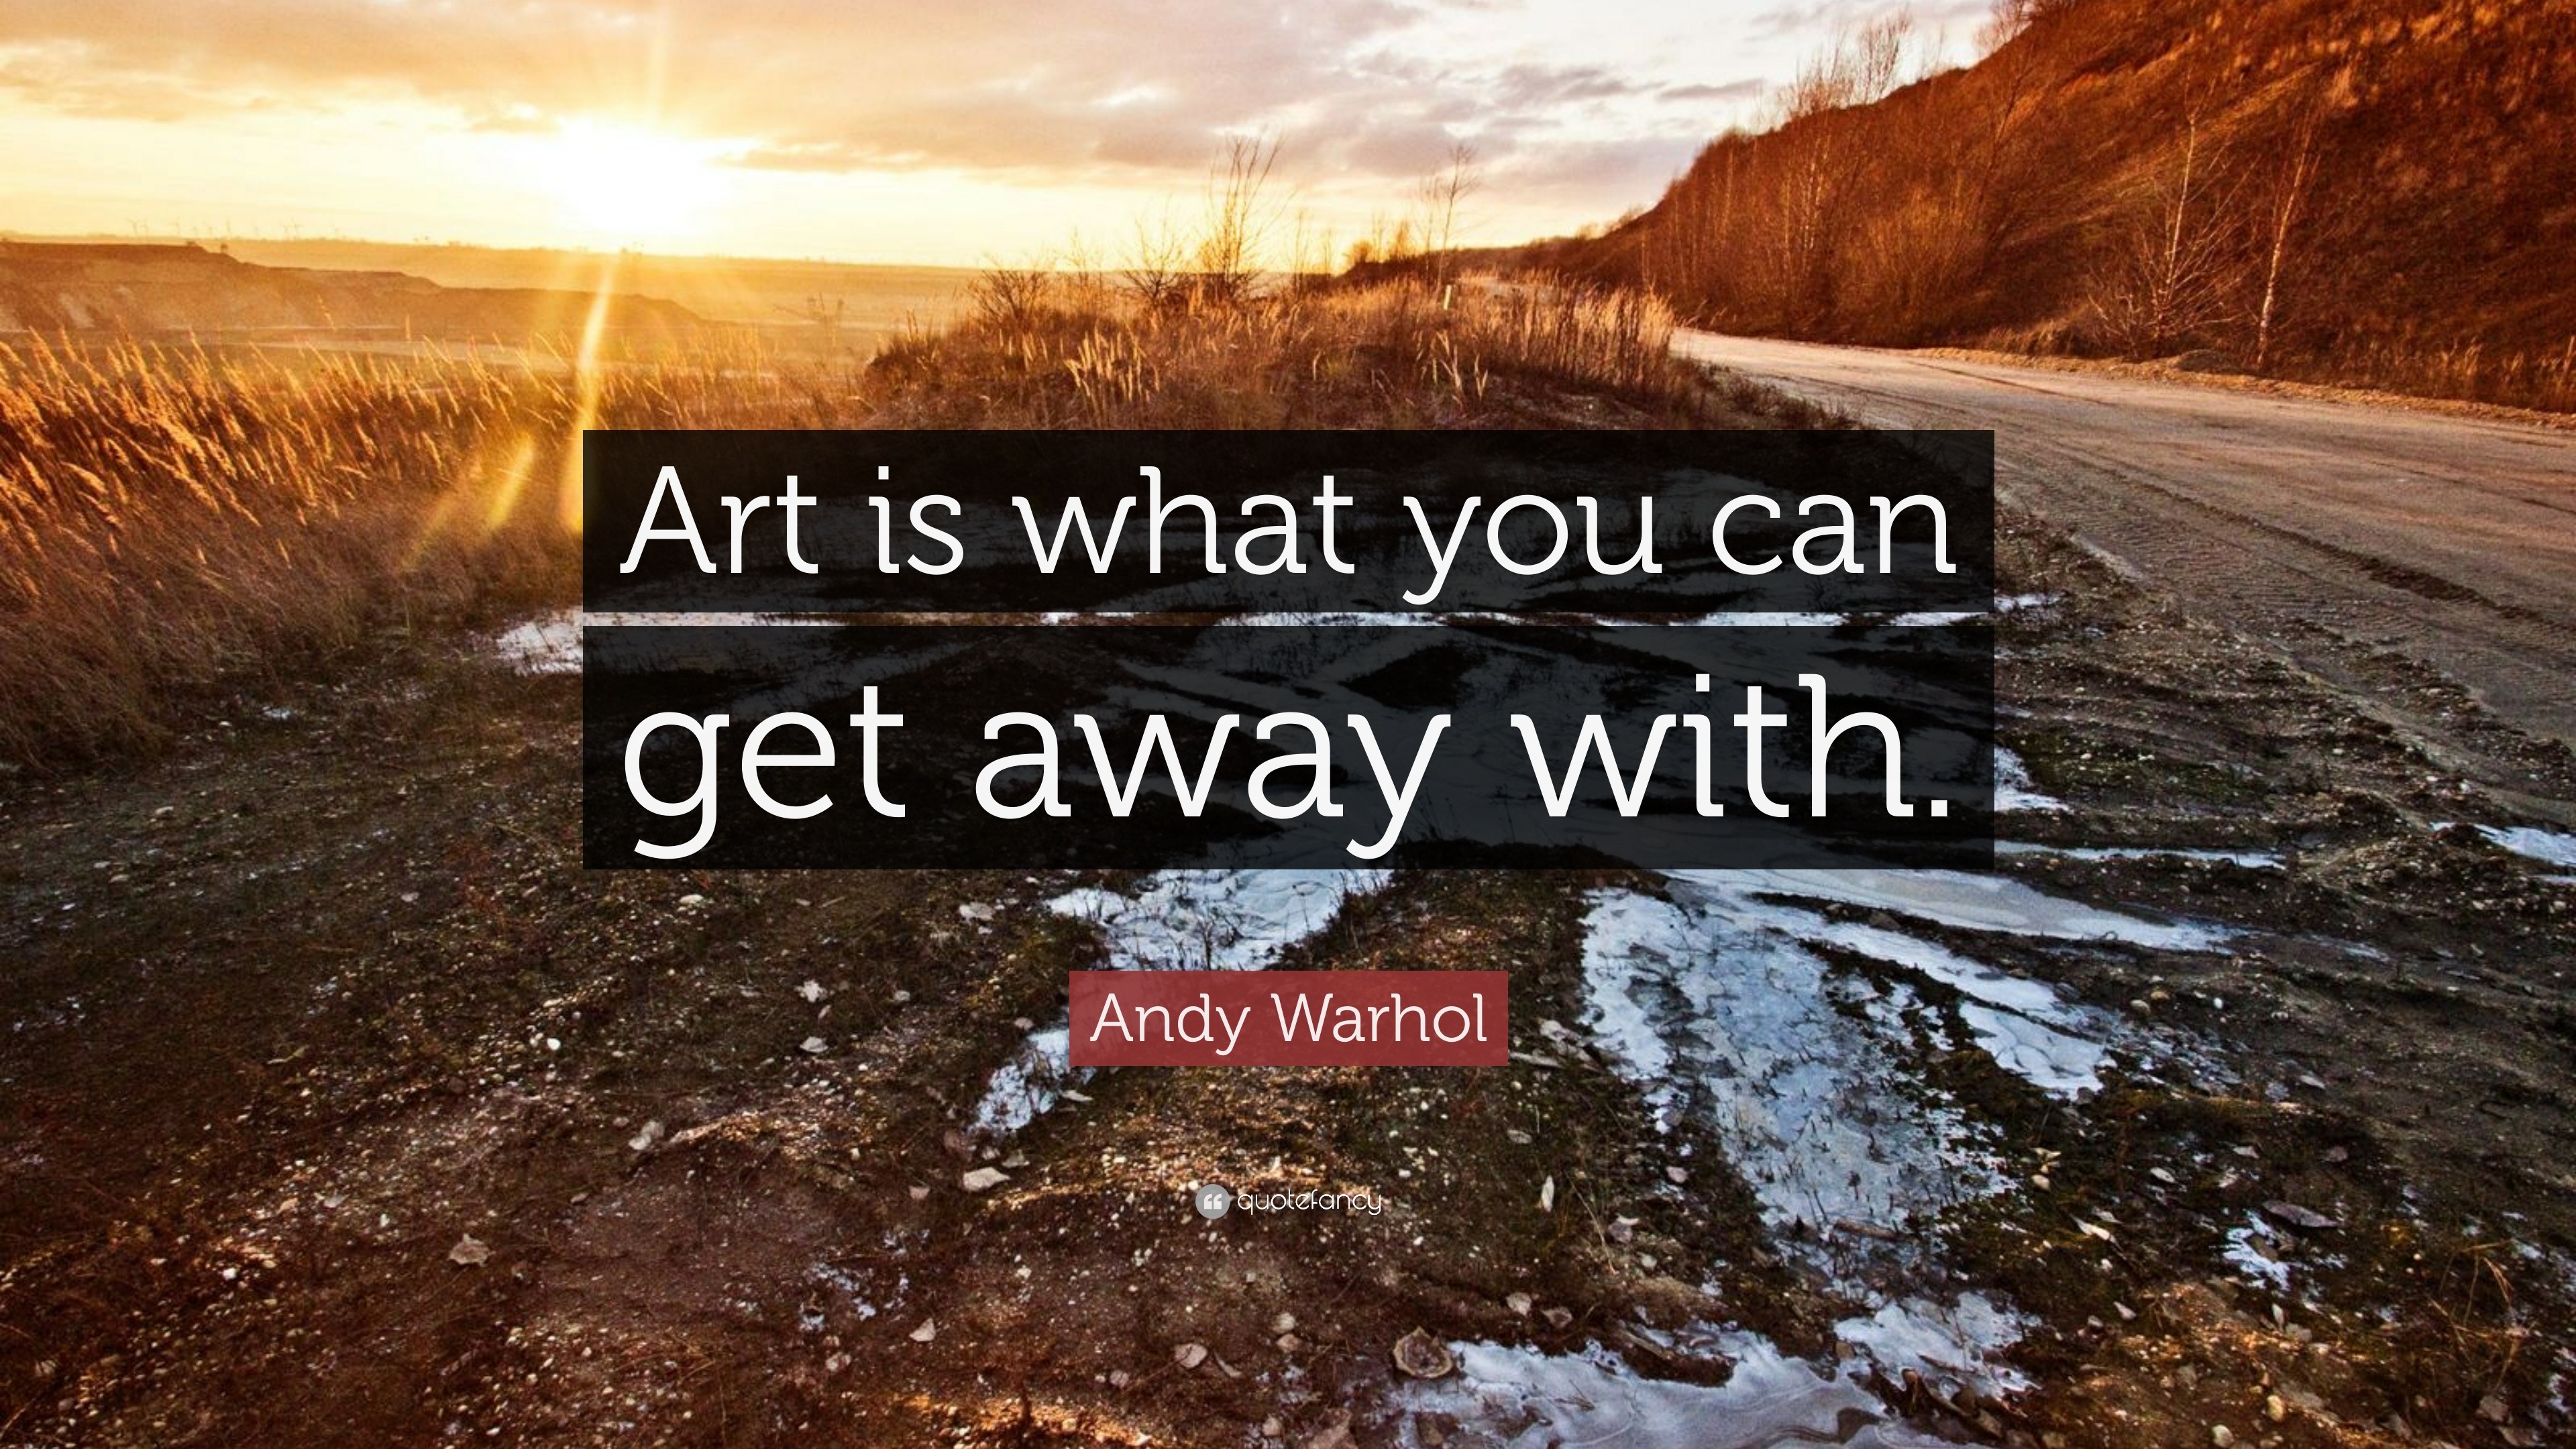 Andy Warhol Quote: “Art Is What You Can Get Away With.”